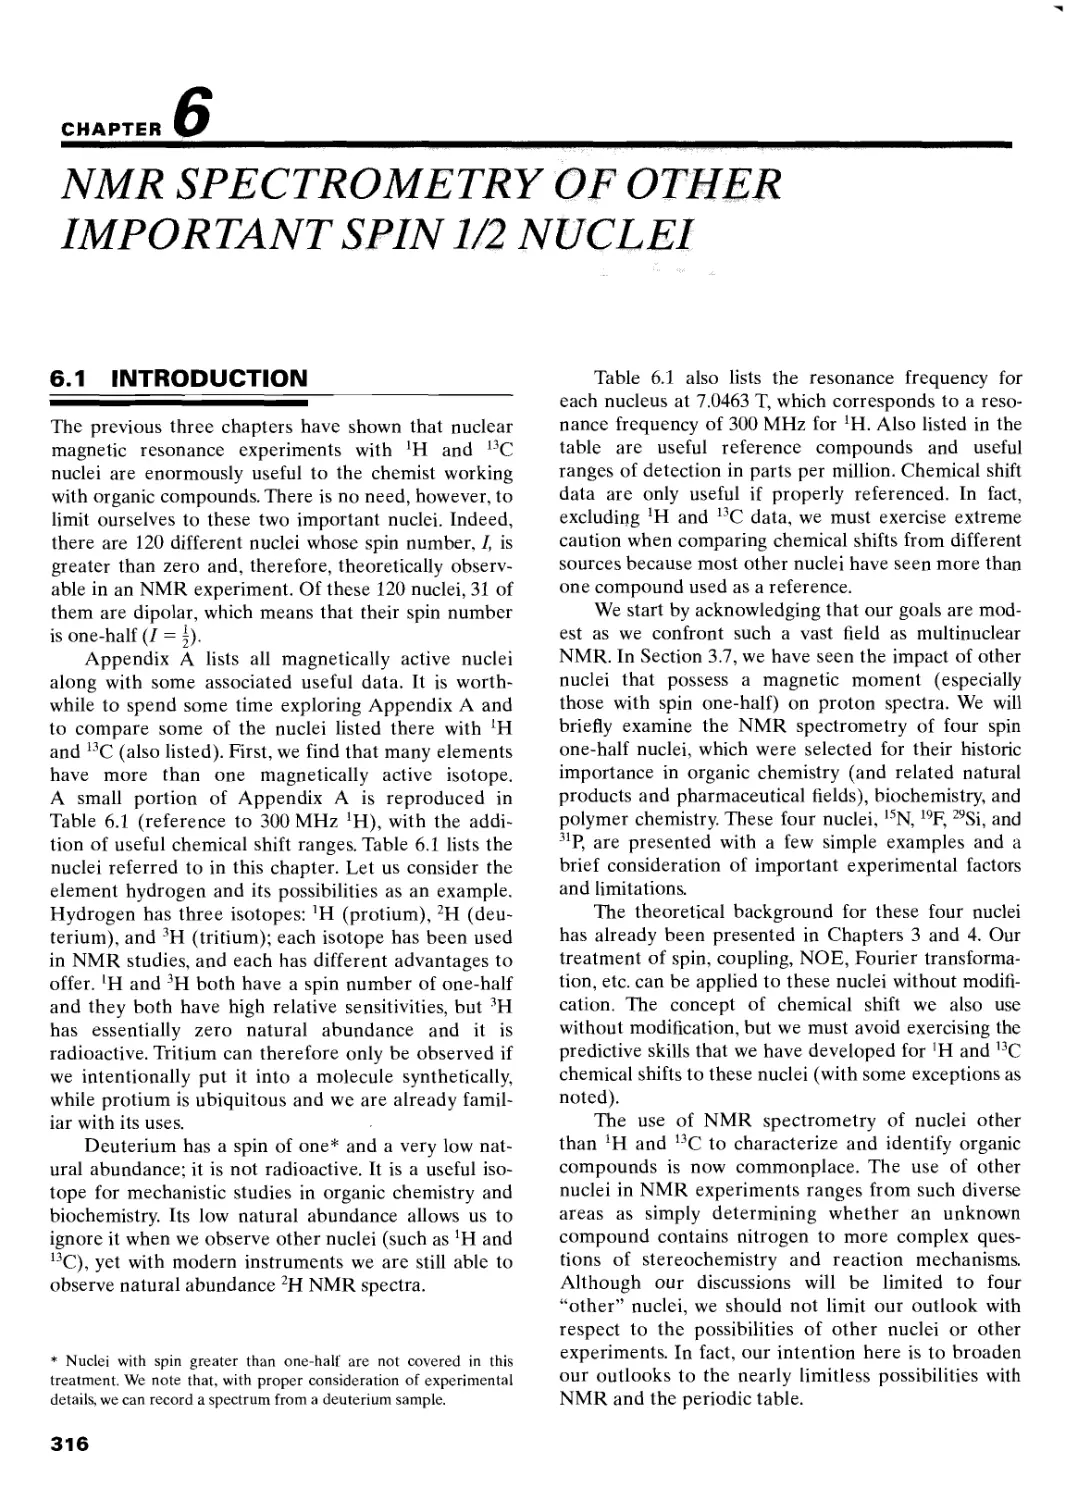 Chapter 6: NMR Spectrometry of Other Important Spin 1/2 Nuclei